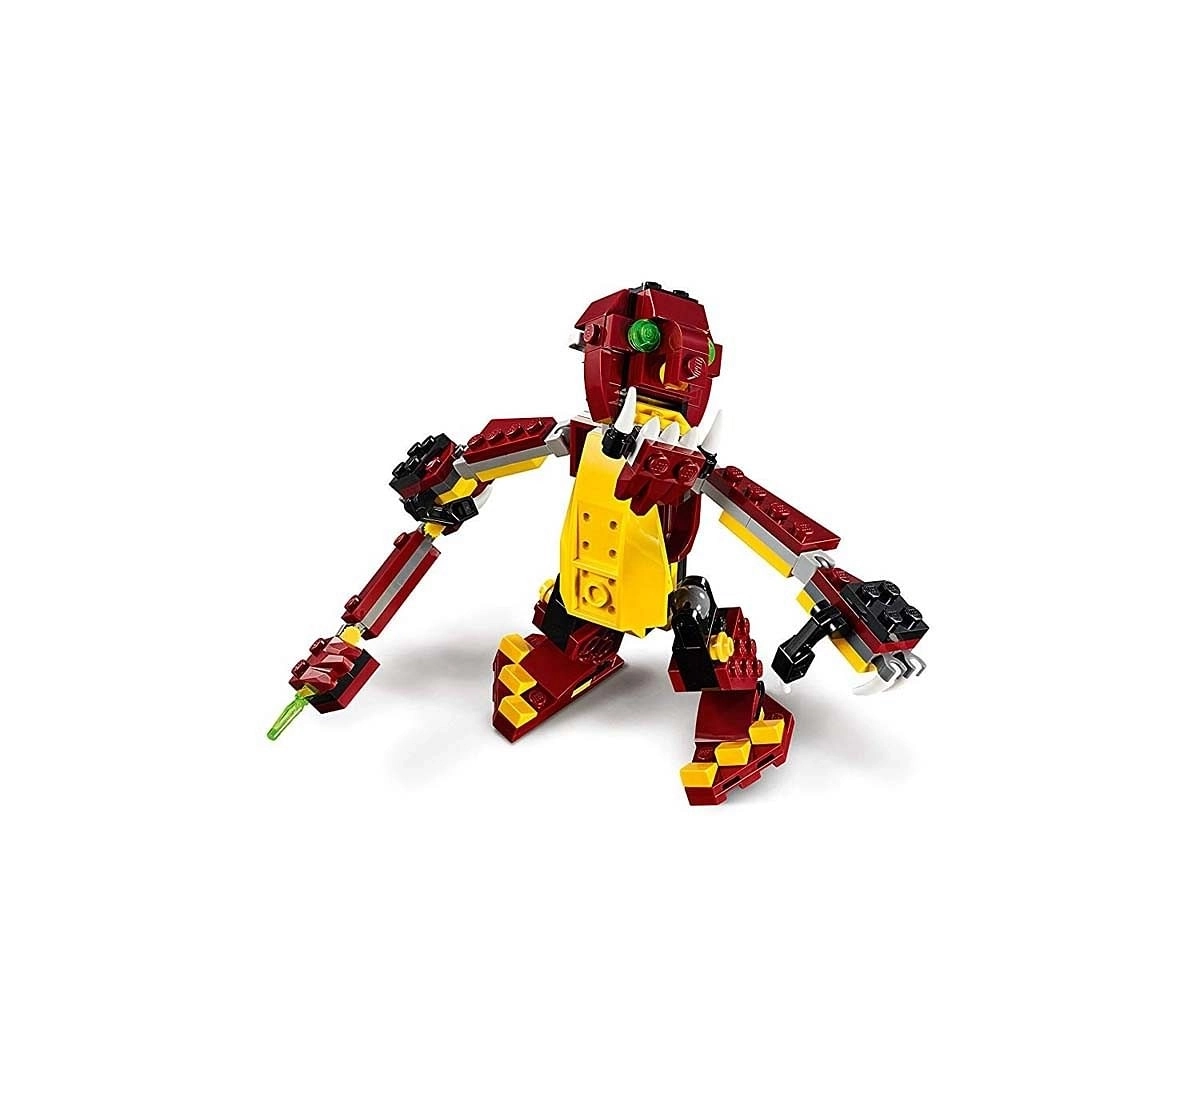  Lego Creator 3 In 1 Mythical Creatures (223 Pcs) 31073  Blocks for Kids age 7Y+ (Multi Colour) 